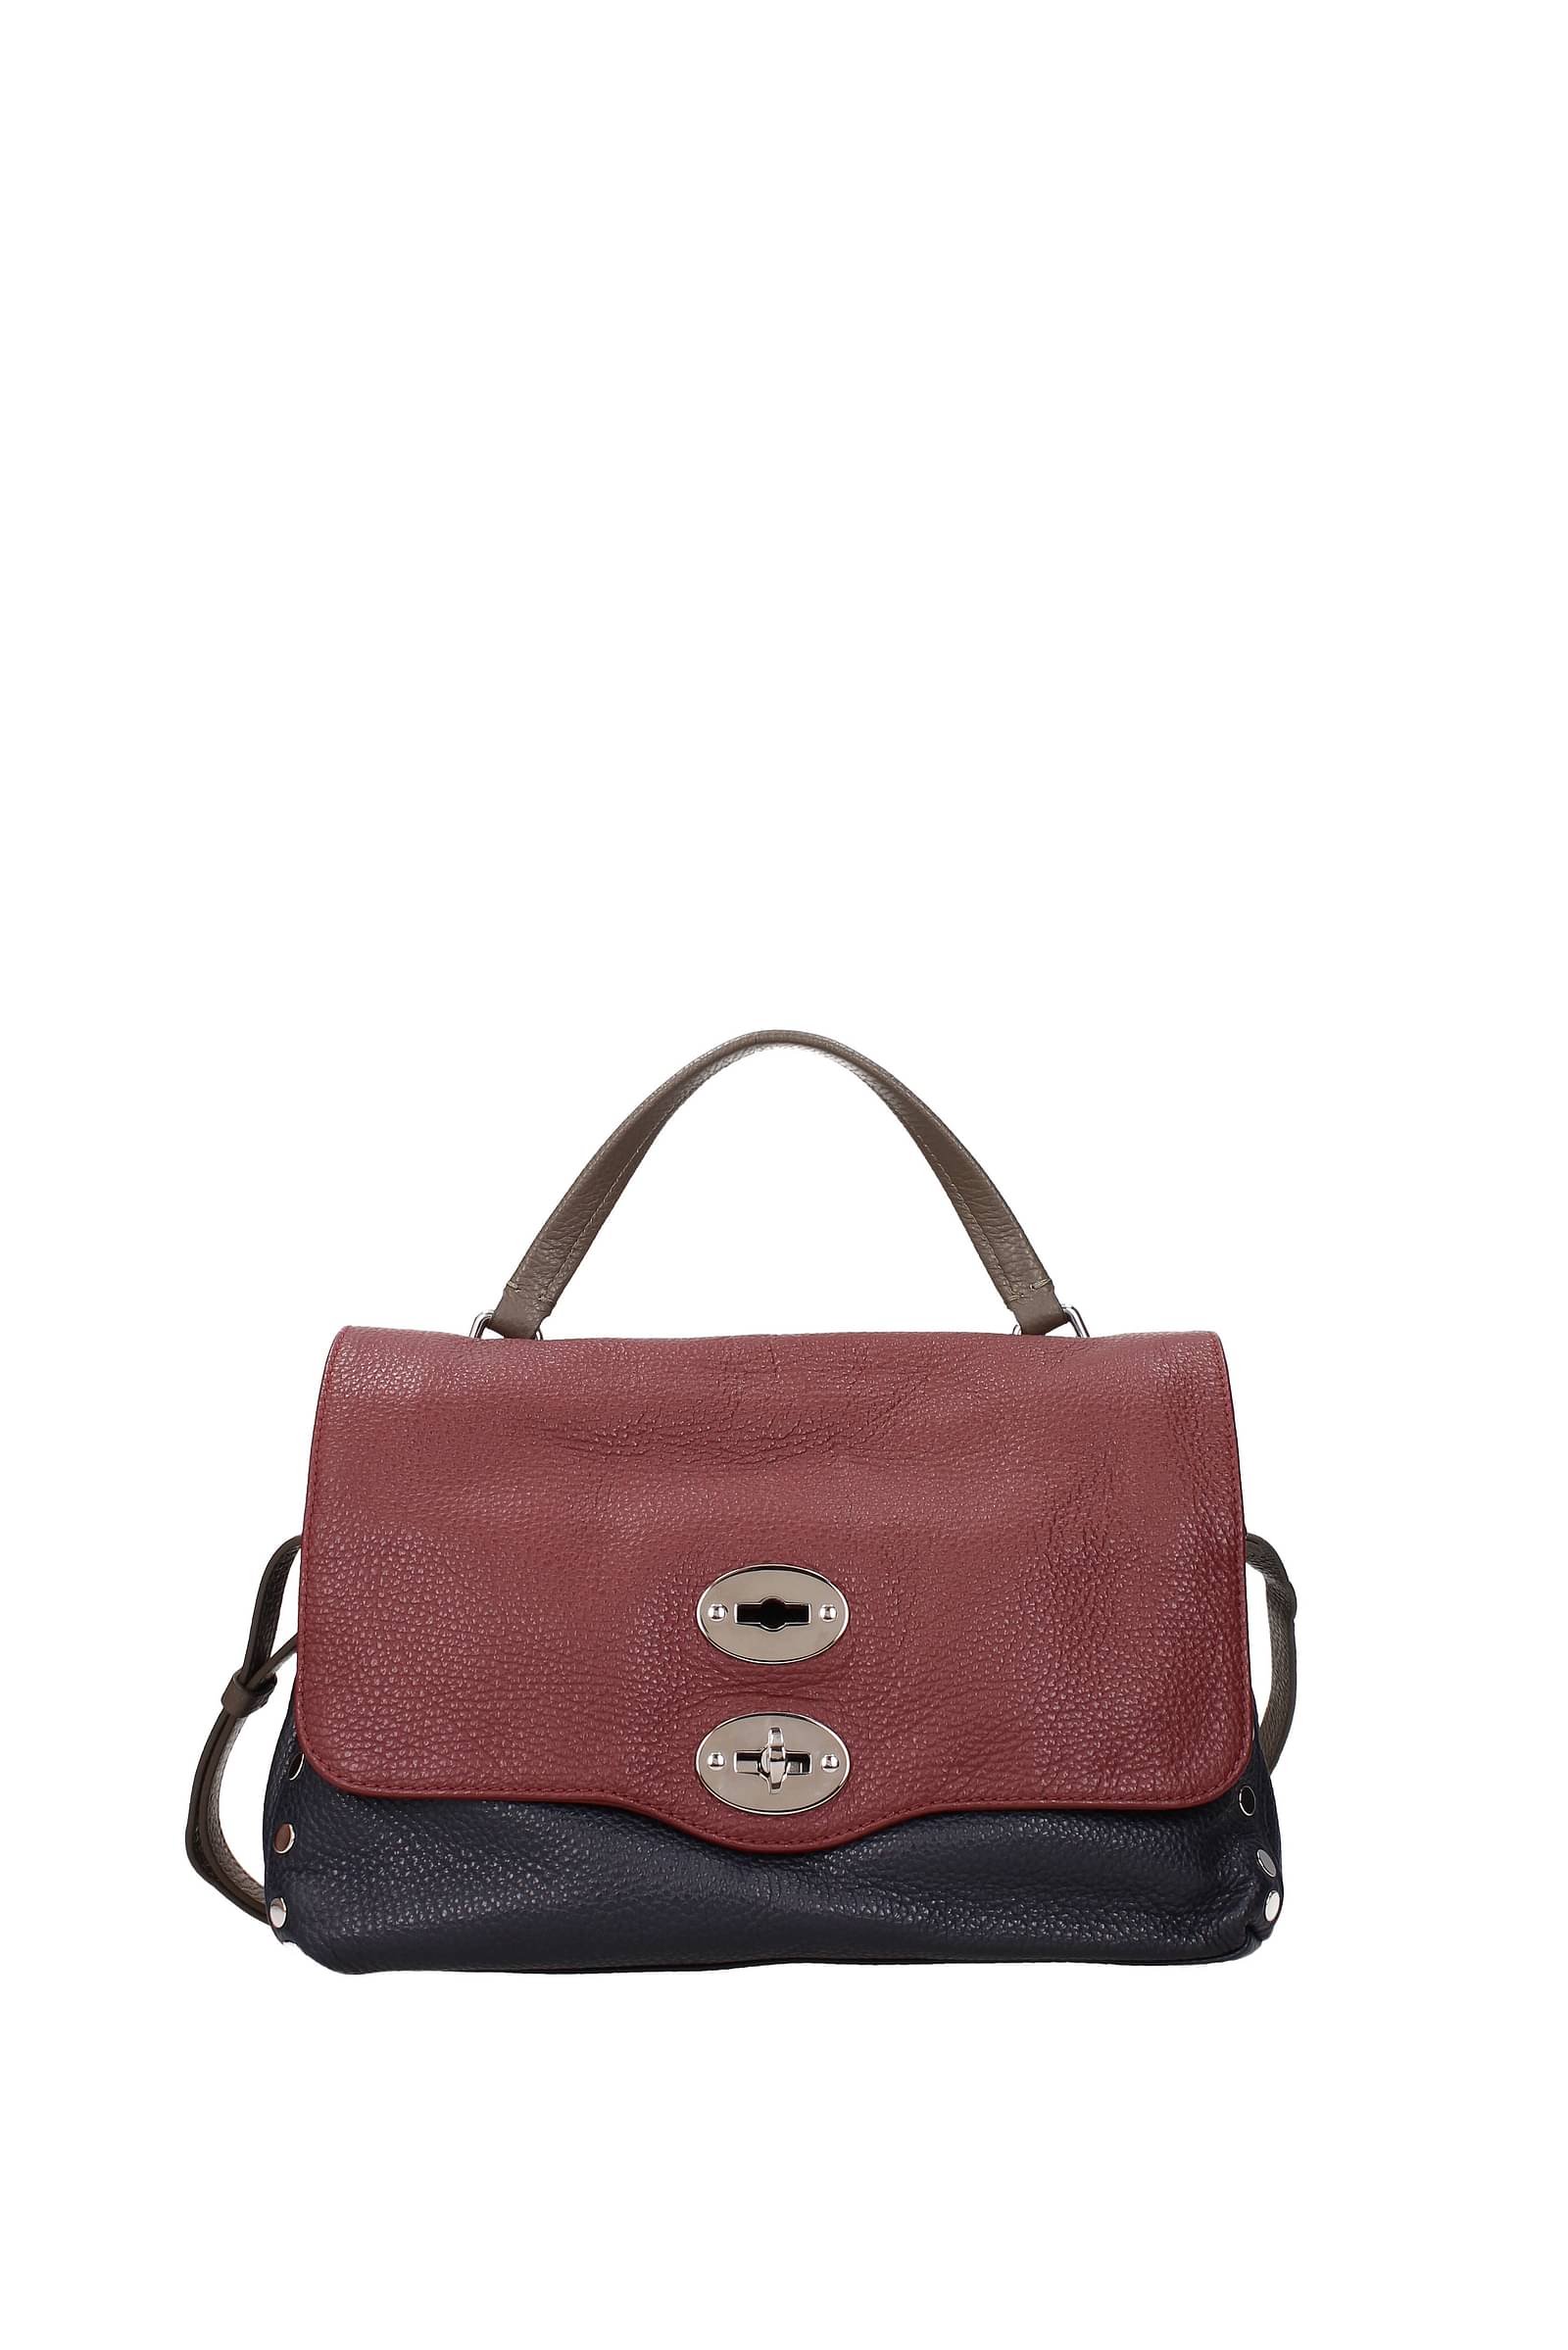 Zanellato: bags at outlet prices on sale